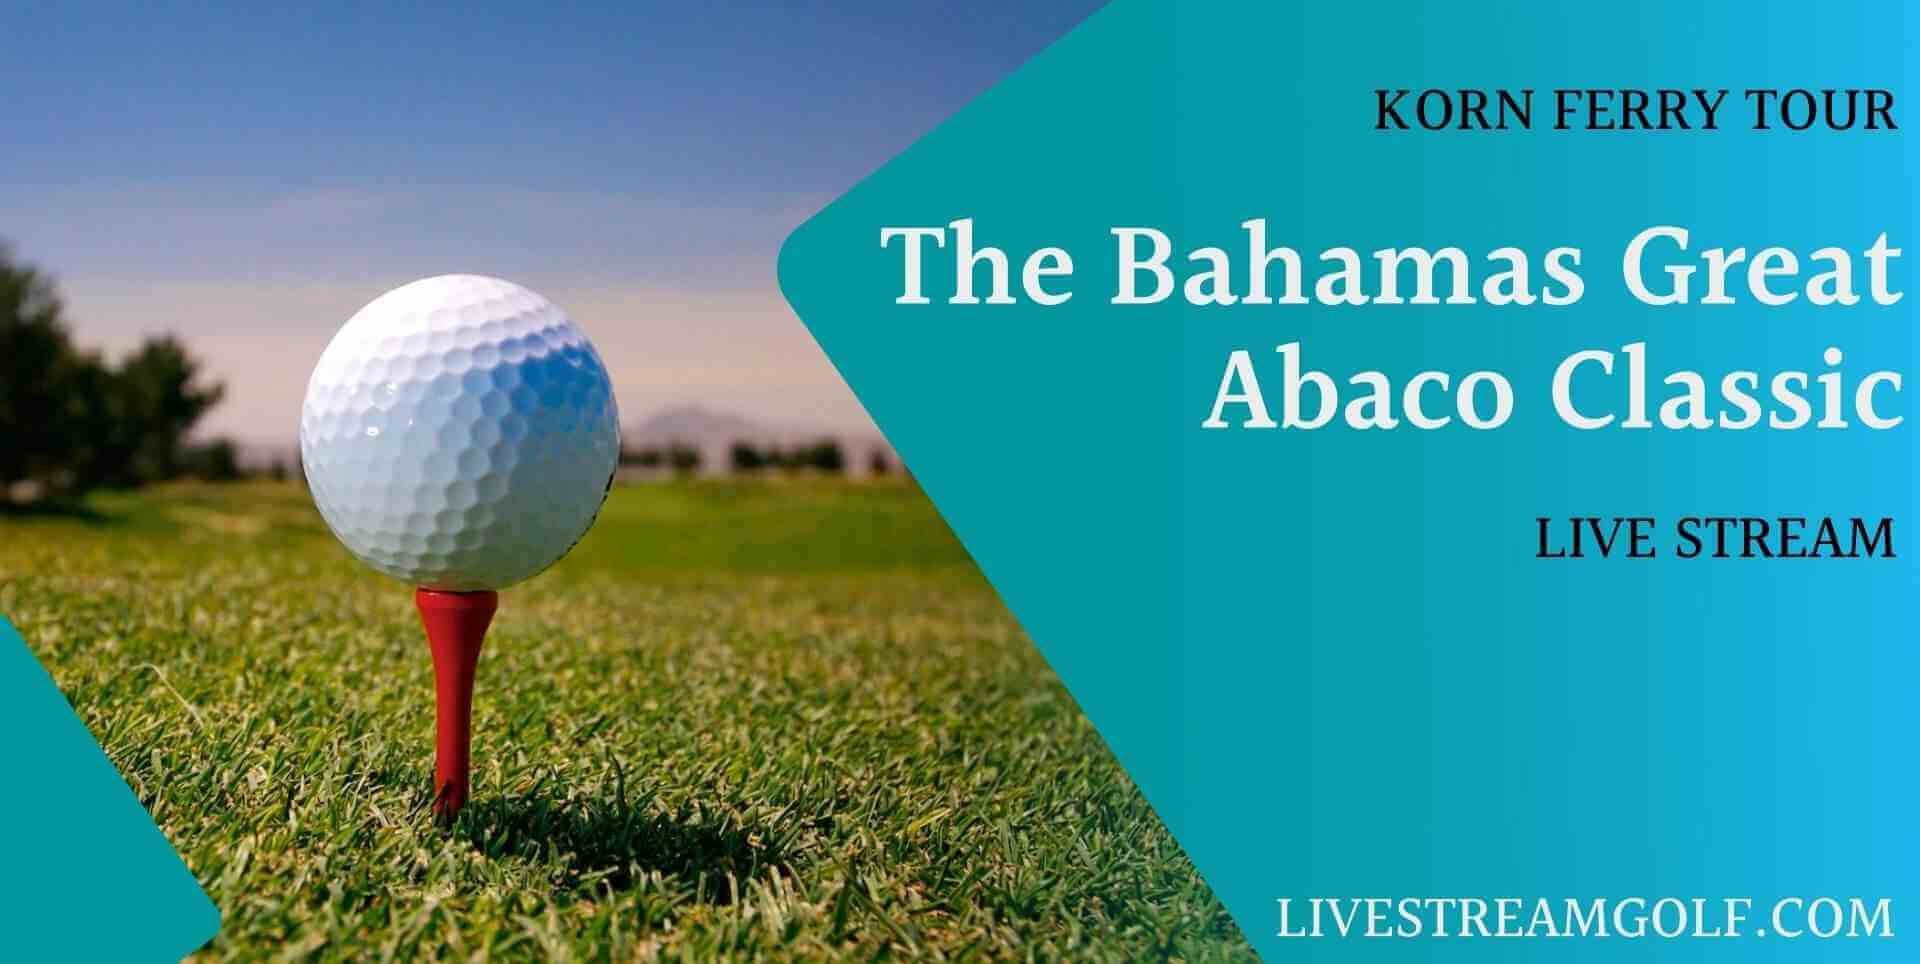 Great Abaco Classic Live Streaming Korn Ferry